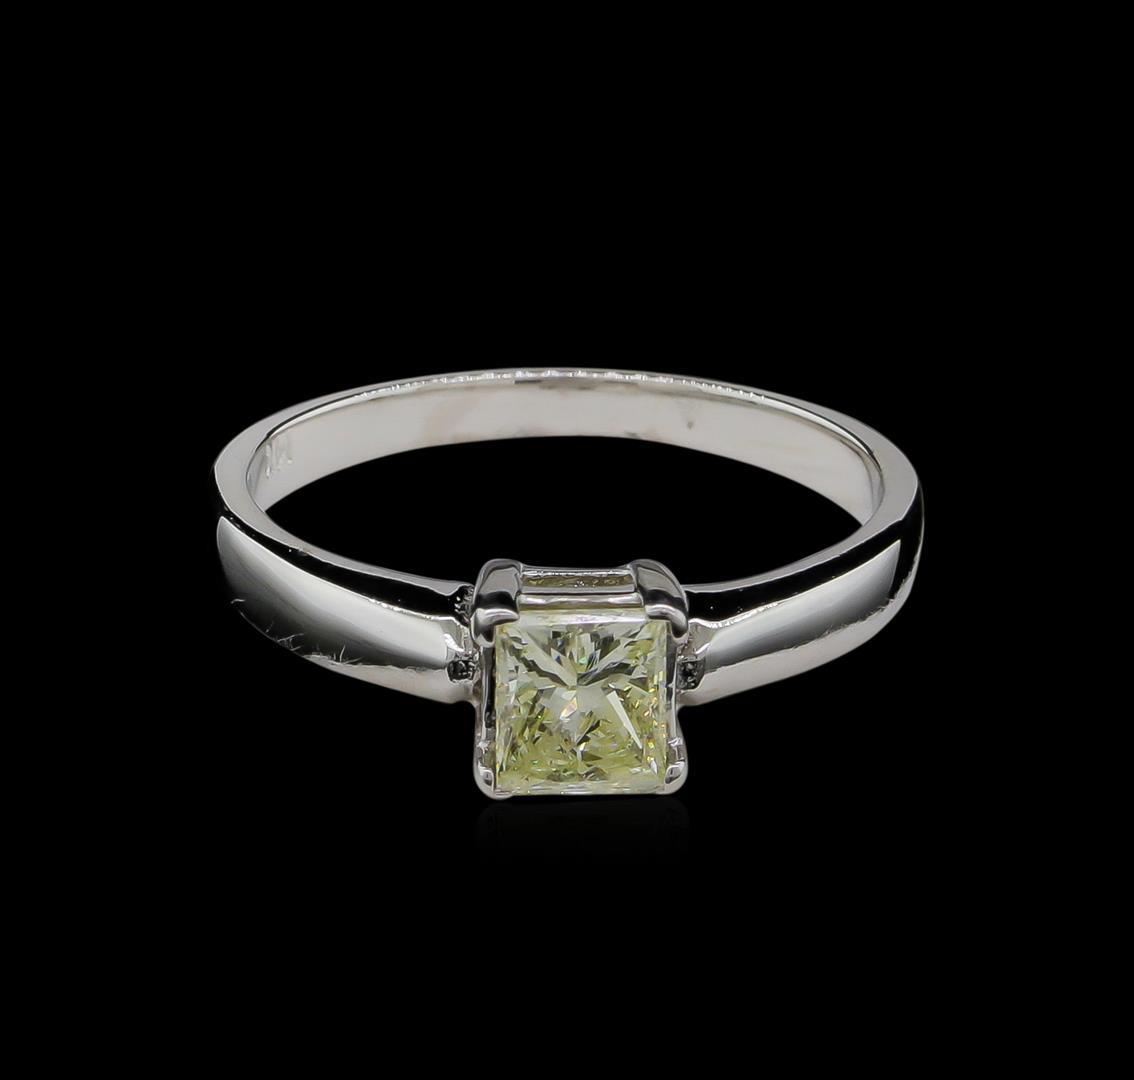 0.70 ctw Light Yellow Diamond Solitaire Ring - 14KT White Gold